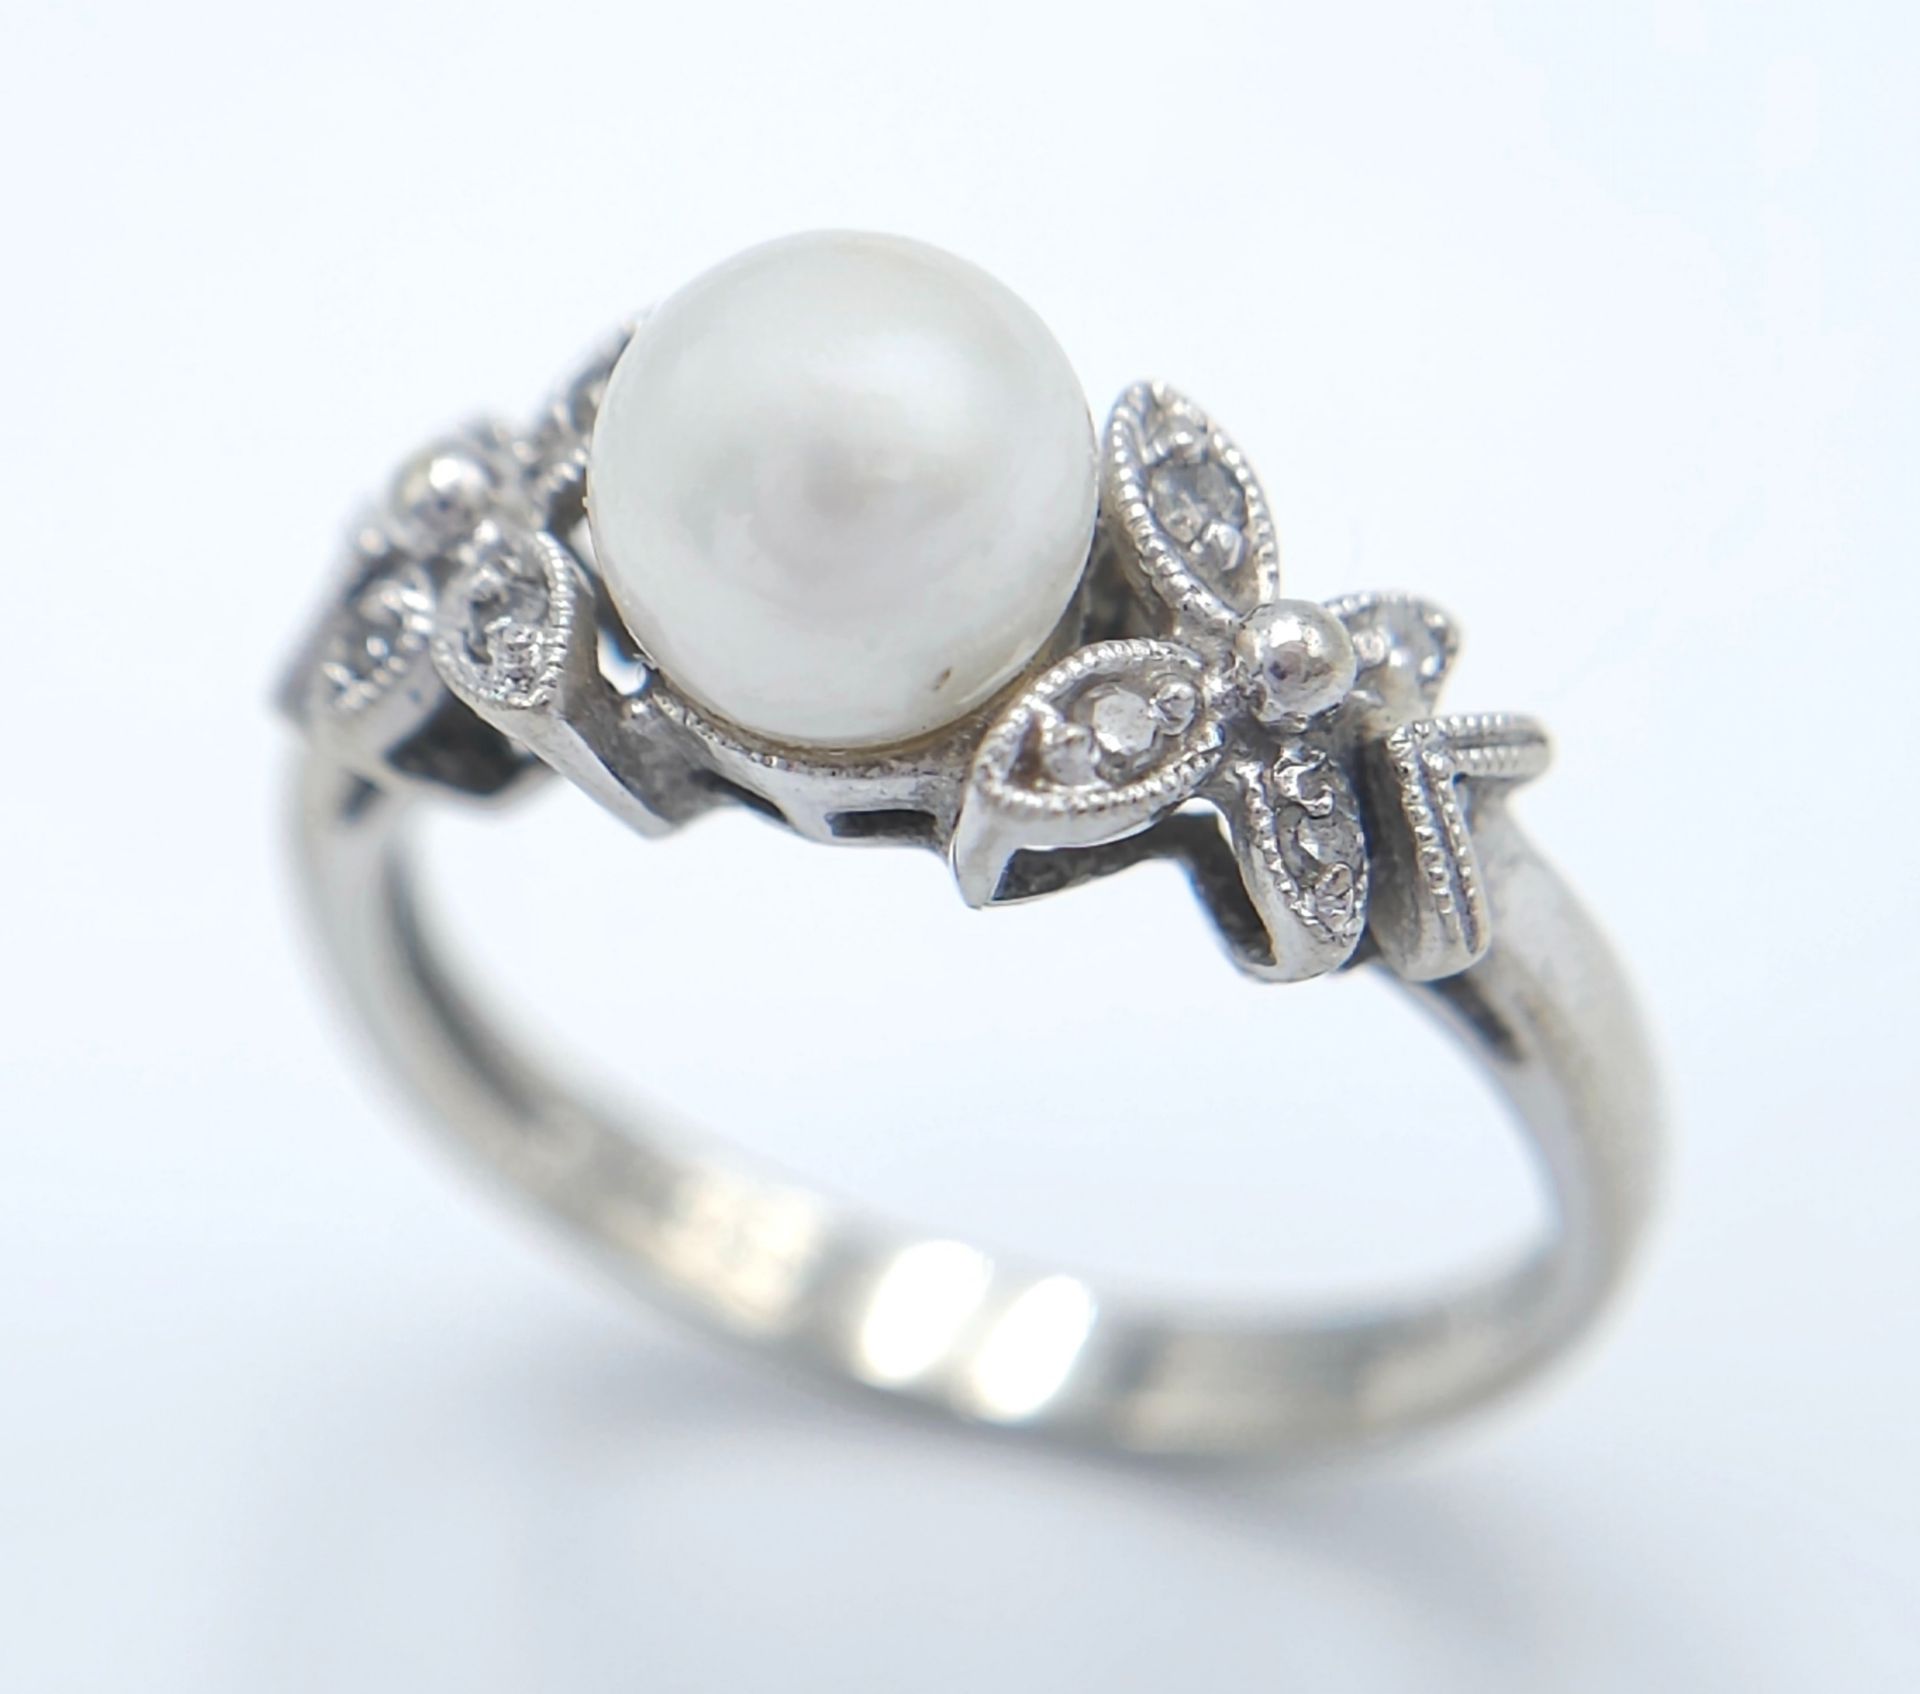 A 14K White Gold, Pearl and Diamond Ring. Central pearl with diamond accents. Size L 1/2. 2.5g total - Image 2 of 6